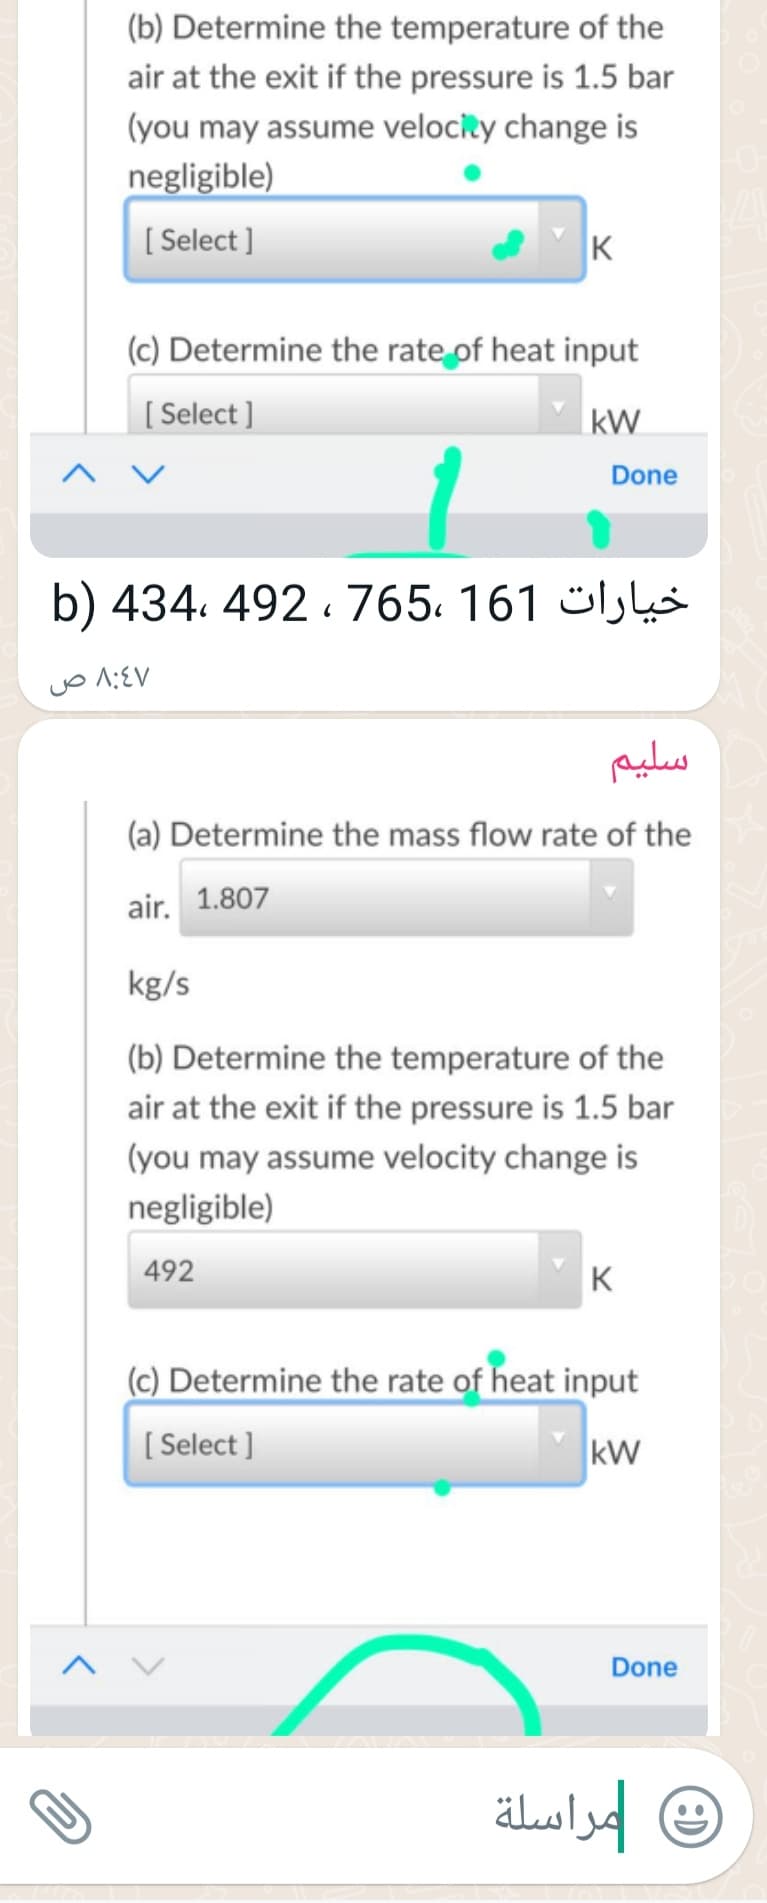 (b) Determine the temperature of the
air at the exit if the pressure is 1.5 bar
(you may assume velocity change is
negligible)
[ Select ]
K
(c) Determine the rate of heat input
[ Select ]
|kW
Done
b) 434. 492 . 765. 161 ülk
سليم
(a) Determine the mass flow rate of the
air. 1.807
kg/s
(b) Determine the temperature of the
air at the exit if the pressure is 1.5 bar
(you may assume velocity change is
negligible)
492
K
(c) Determine the rate of heat input
( Select ]
kW
A V
Done
مراسلة
